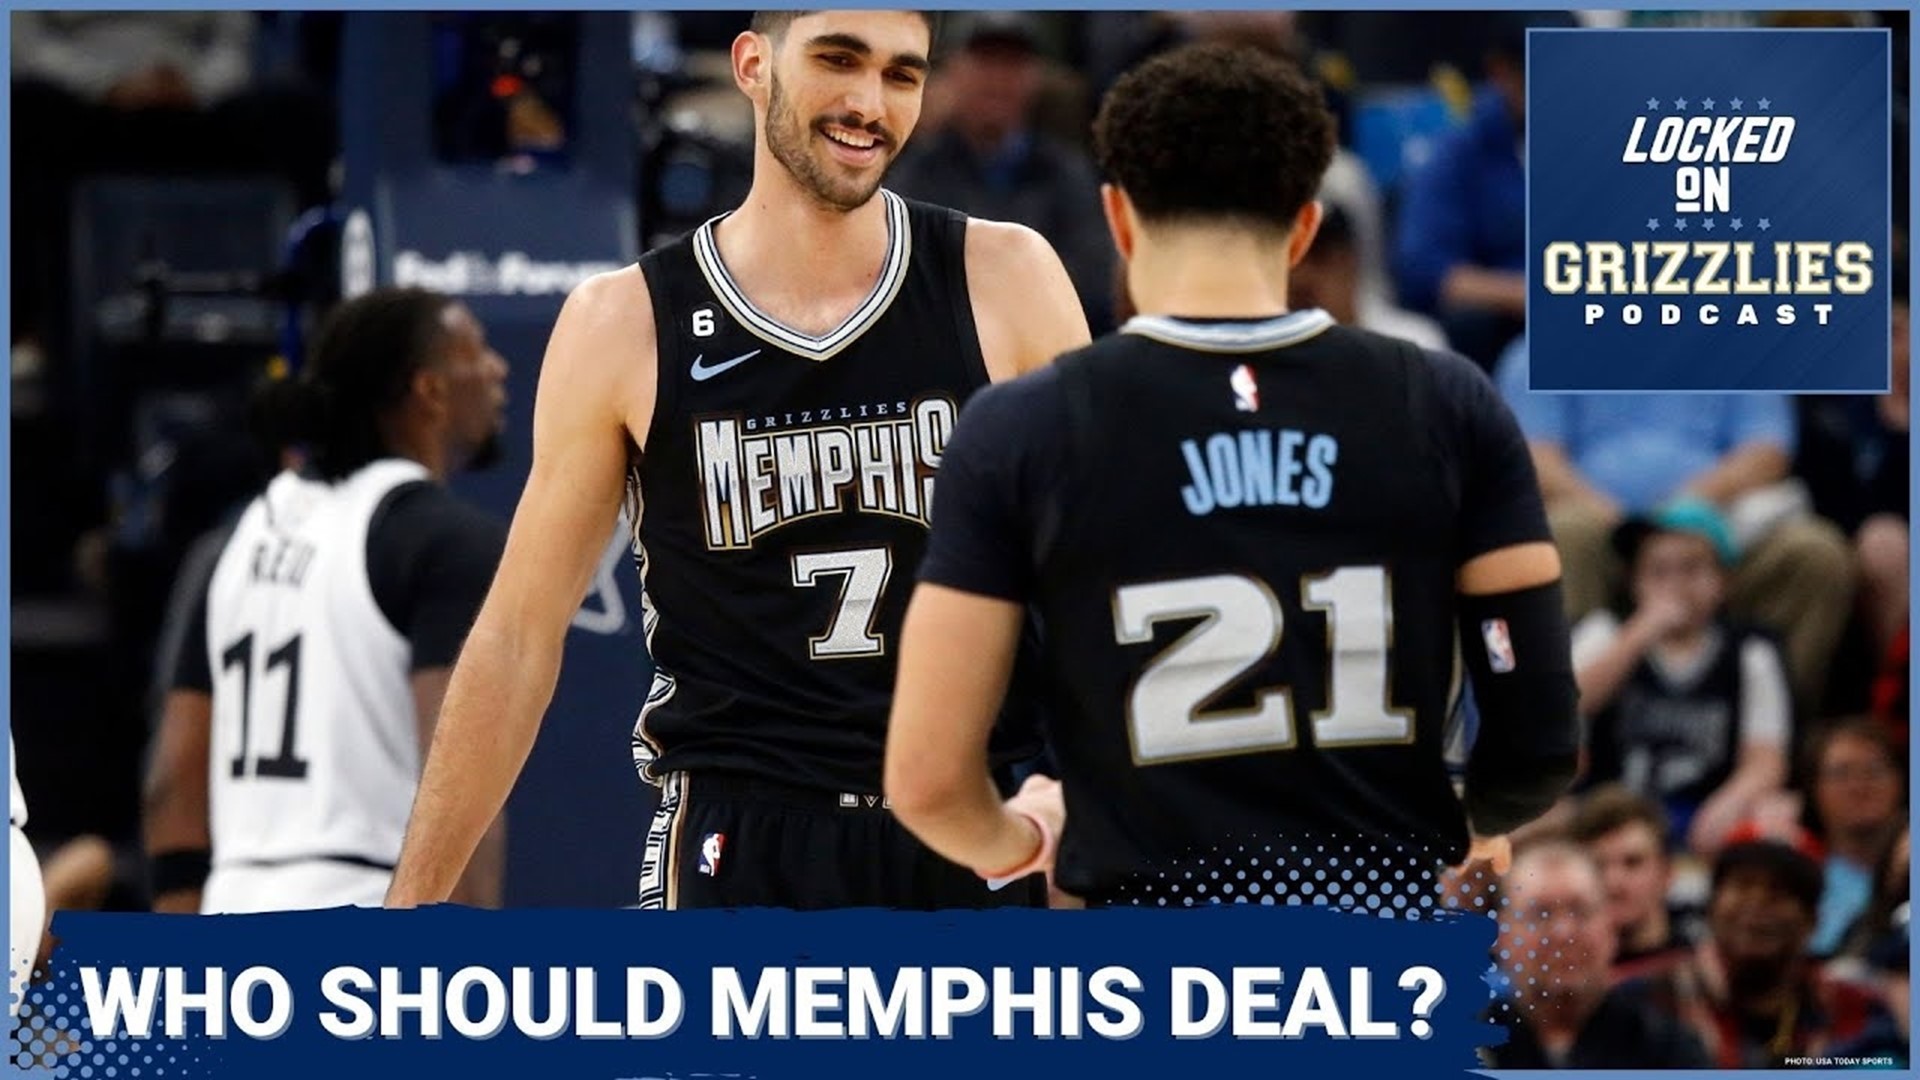 Which Memphis Grizzlies player should be traded to help upgrade the roster?